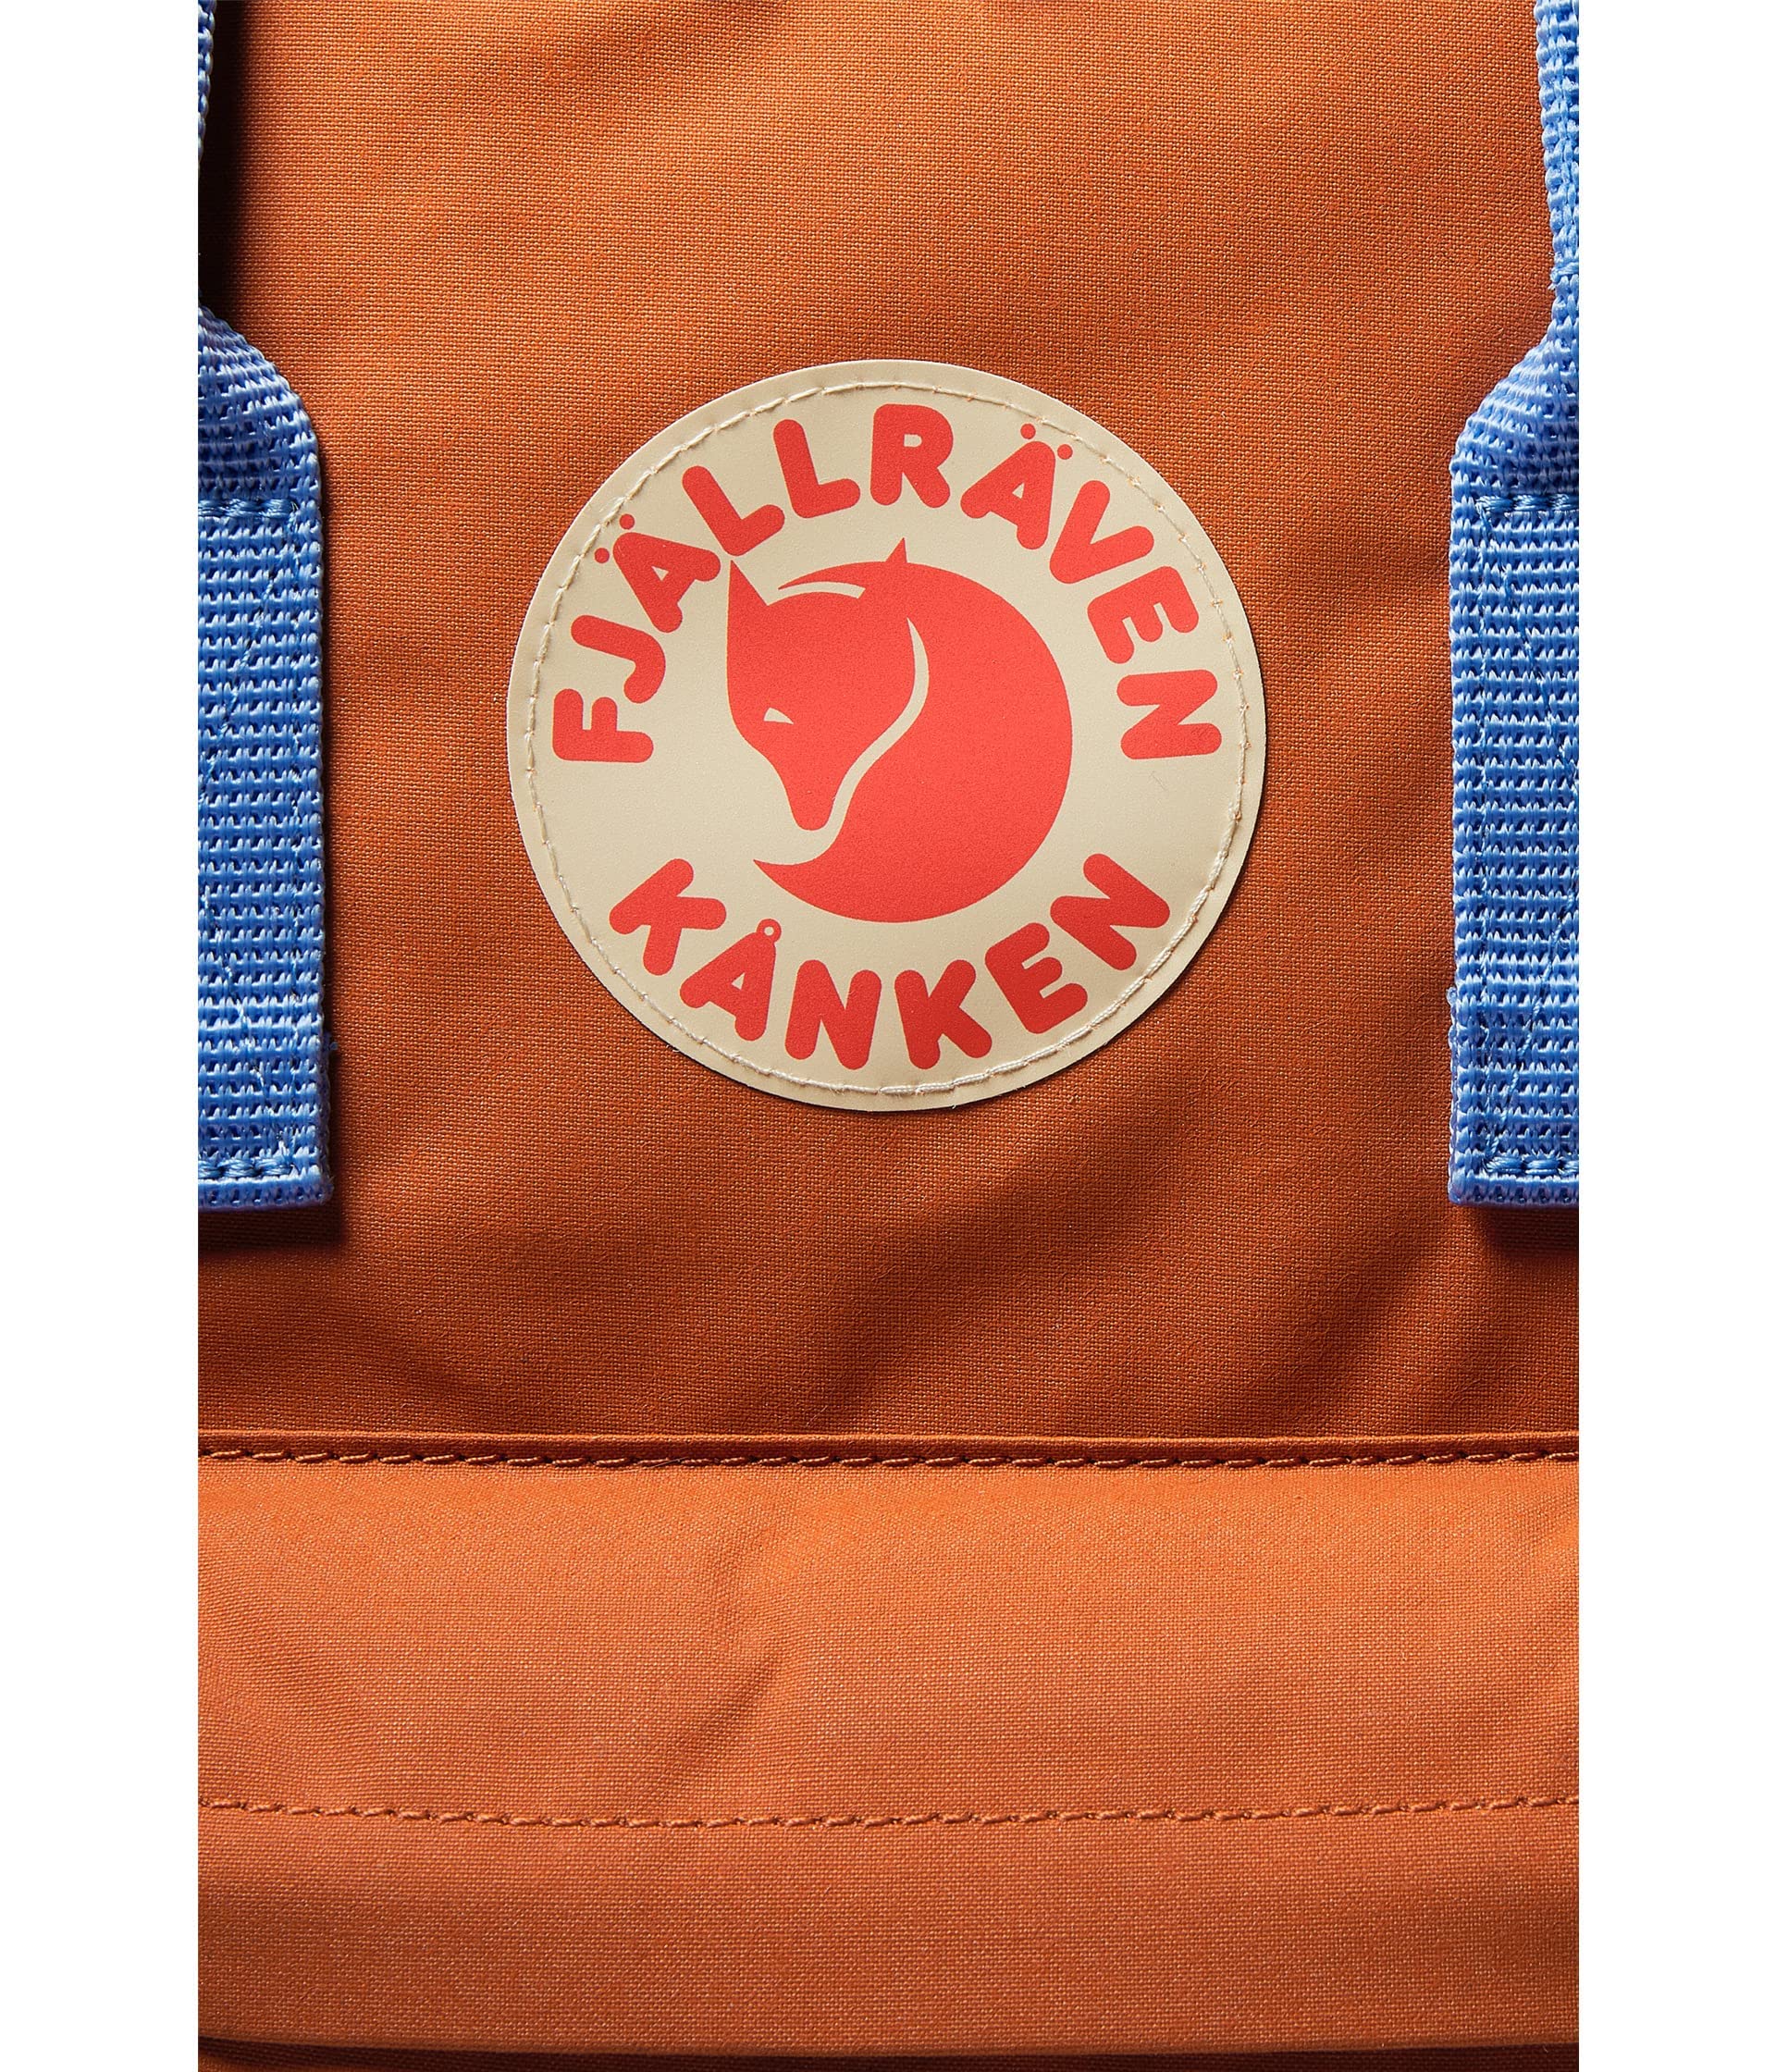 Fjällräven Kånken Backpack for Men, and Women - Lightweight Rugged Vinylon Fabric, Dual Top Handles with Snap Closure, and Classy Look Teracotta Brown/Ultramarine One Size One Size